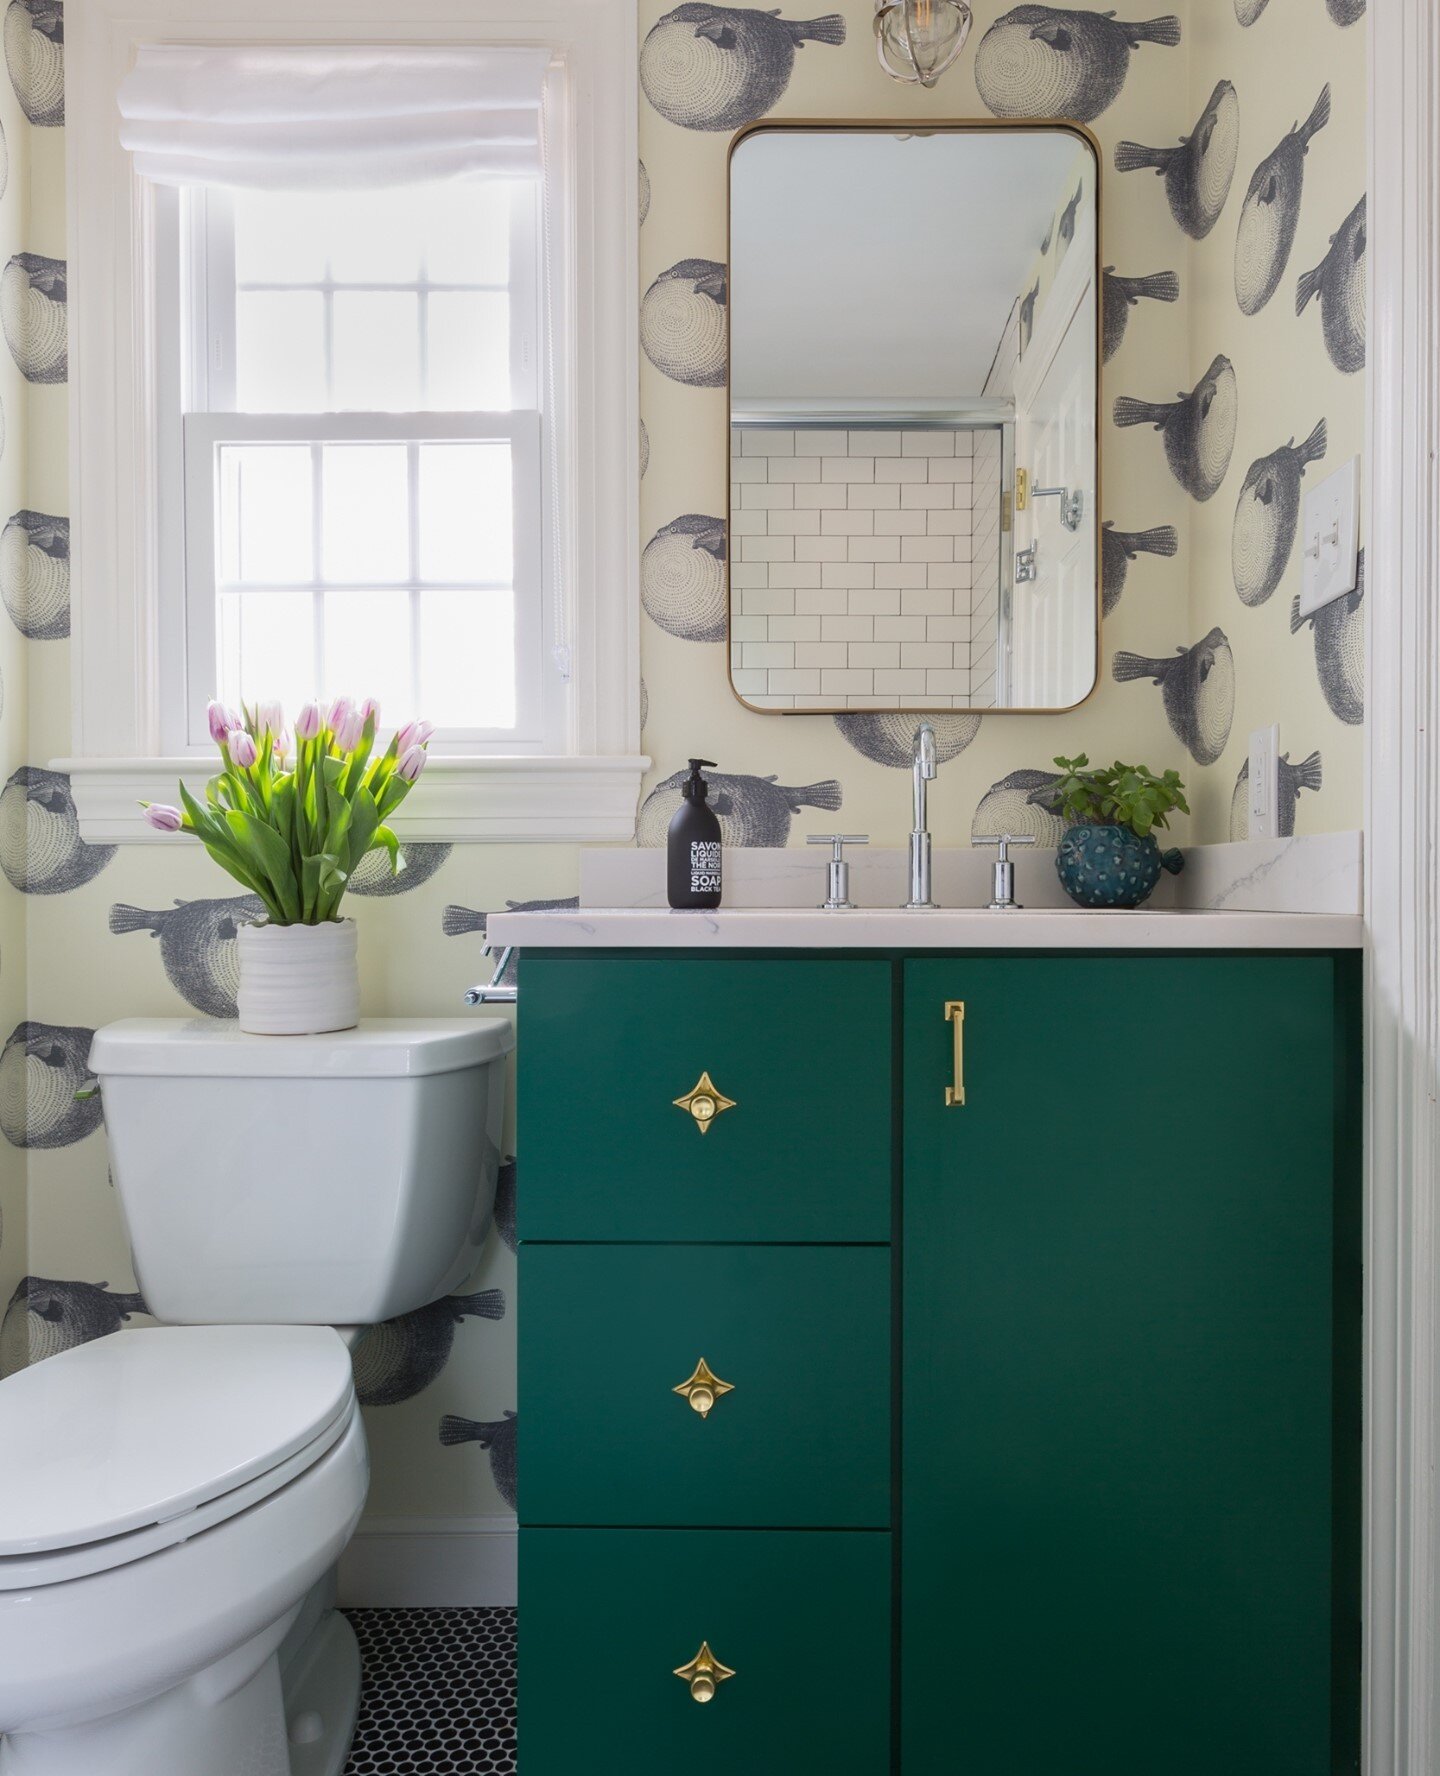 Bathrooms are making big statements these days. Being stretched to the limits on what they can offer for space (yes, we see you in there on your Zoom call!), bathrooms are getting renovated in the most creative ways. ⁠
⁠
Do you have a bathroom that&r